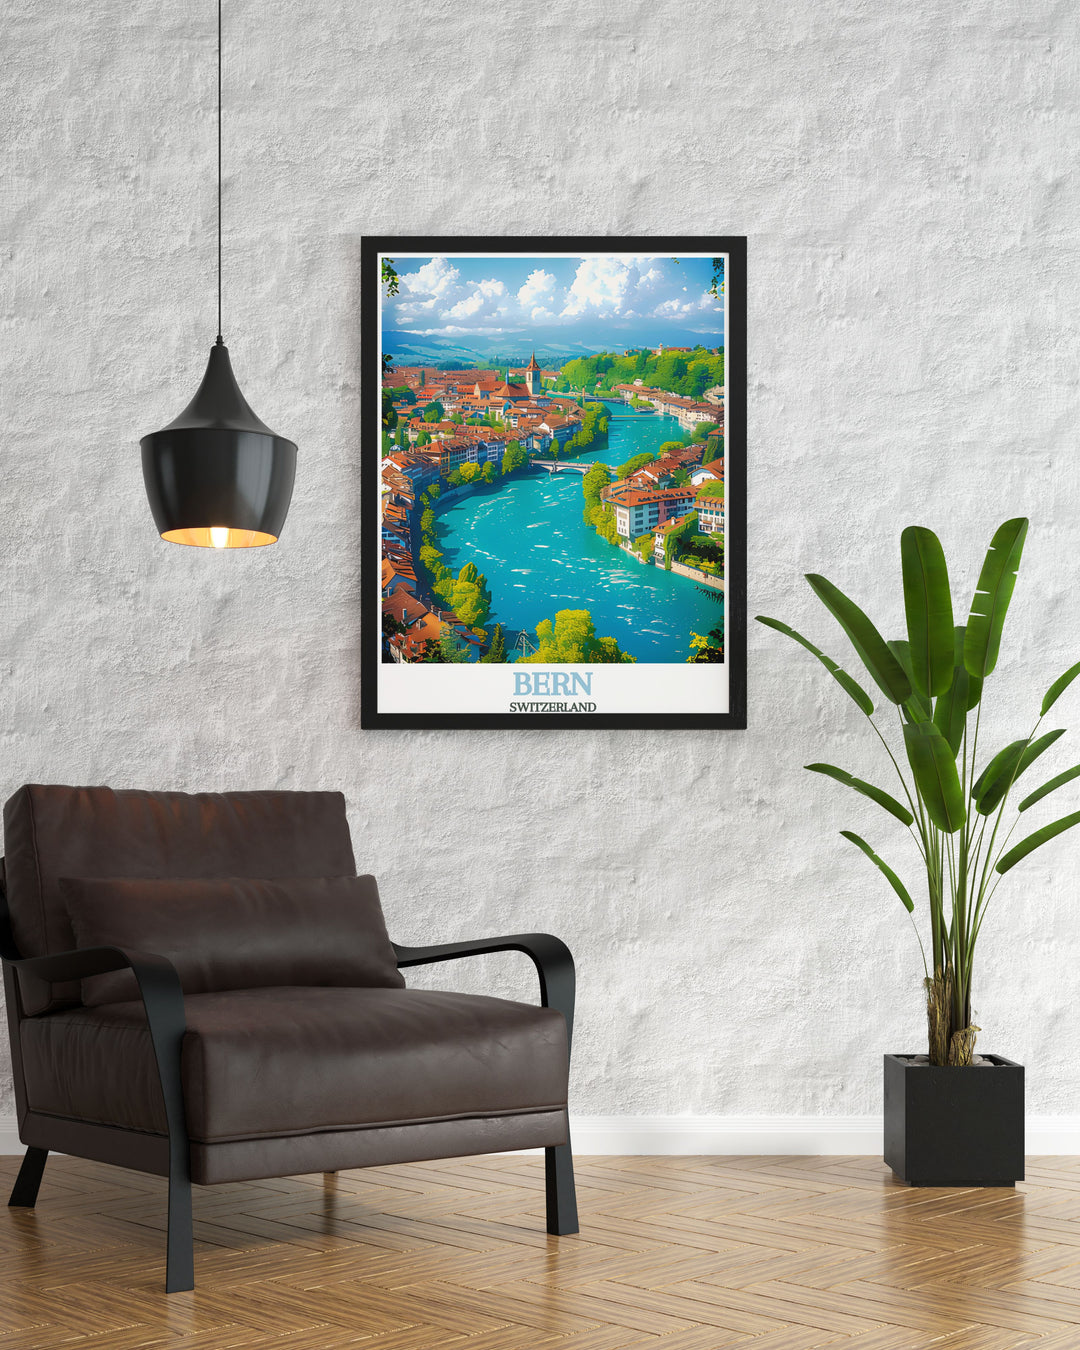 Featuring the lush greenery and historic bridges along the Aare River, this travel poster captures the natural beauty of Bern, ideal for those who appreciate scenic landscapes.